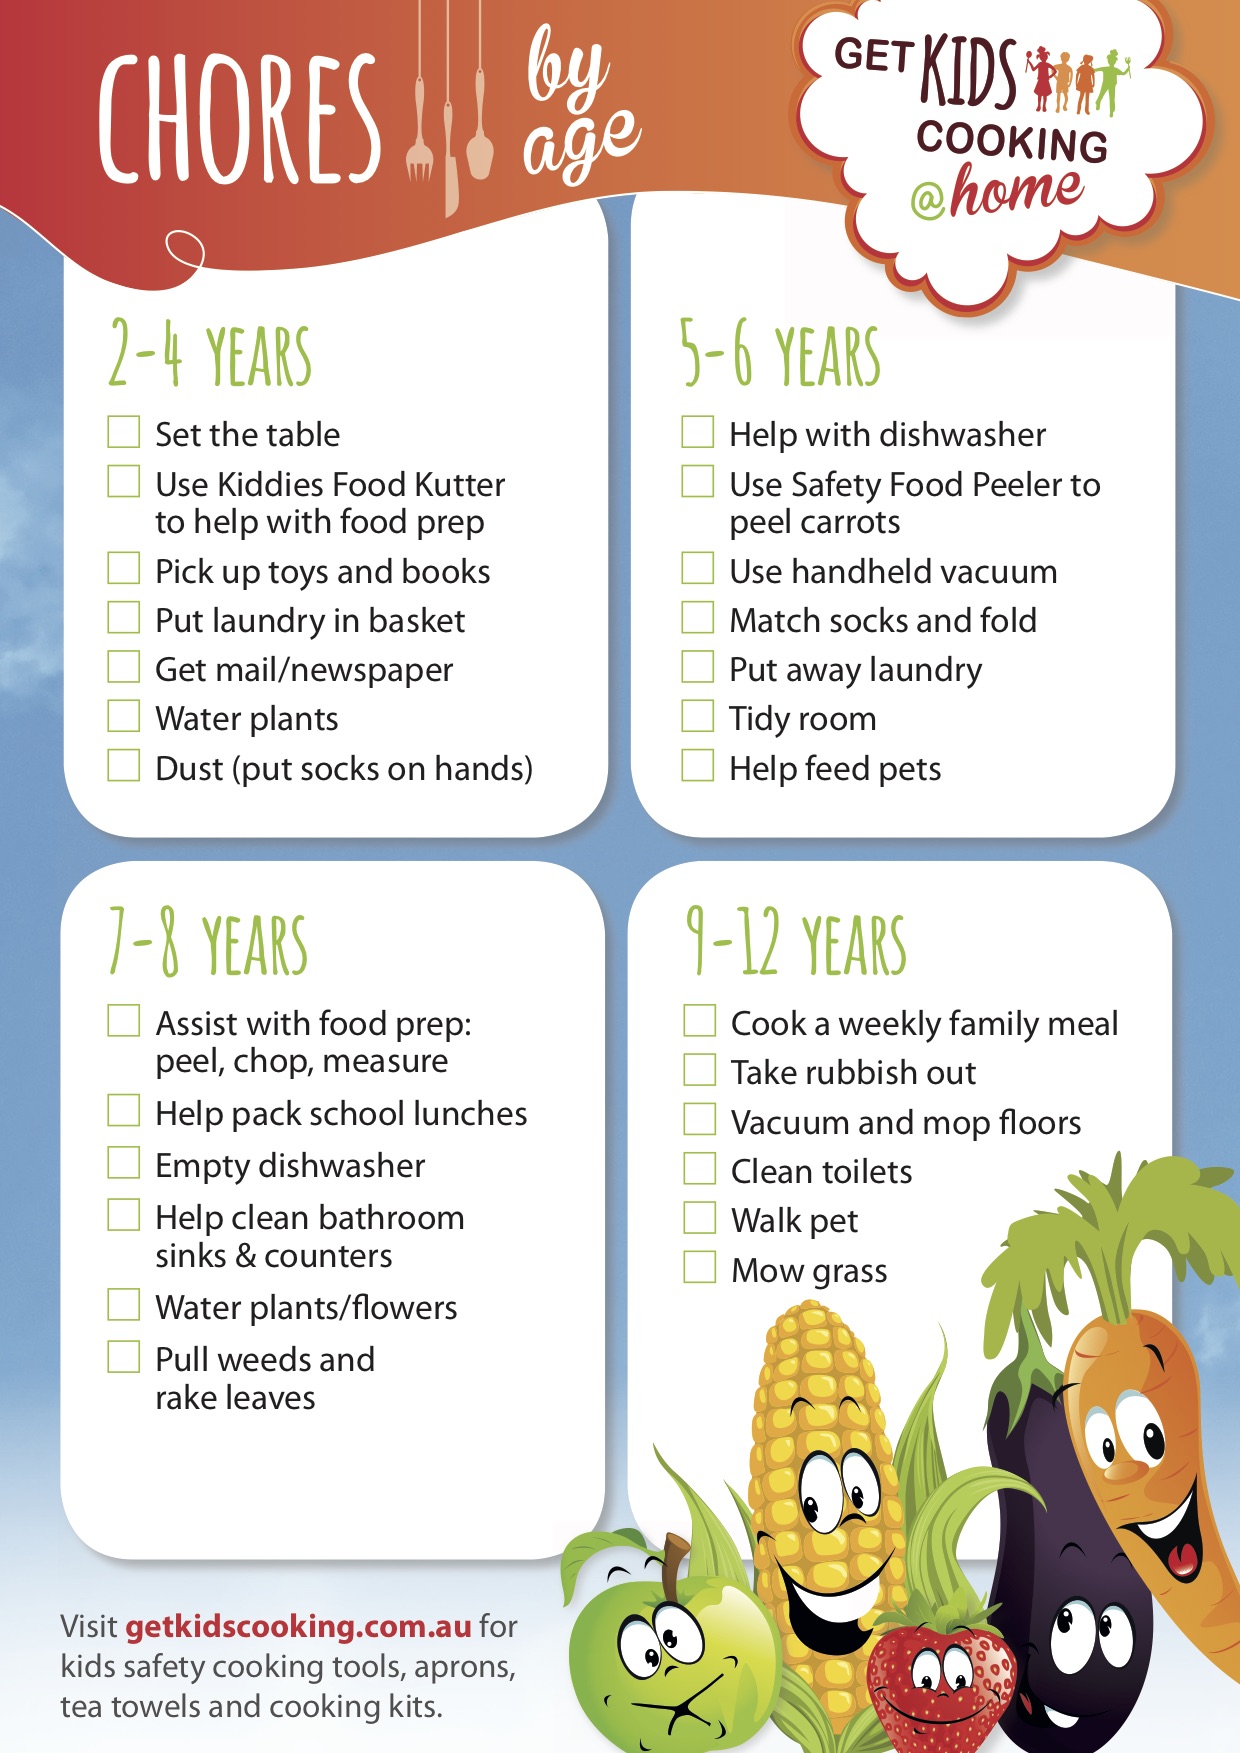 This chart shows what kitchen chores kids can do based on their age